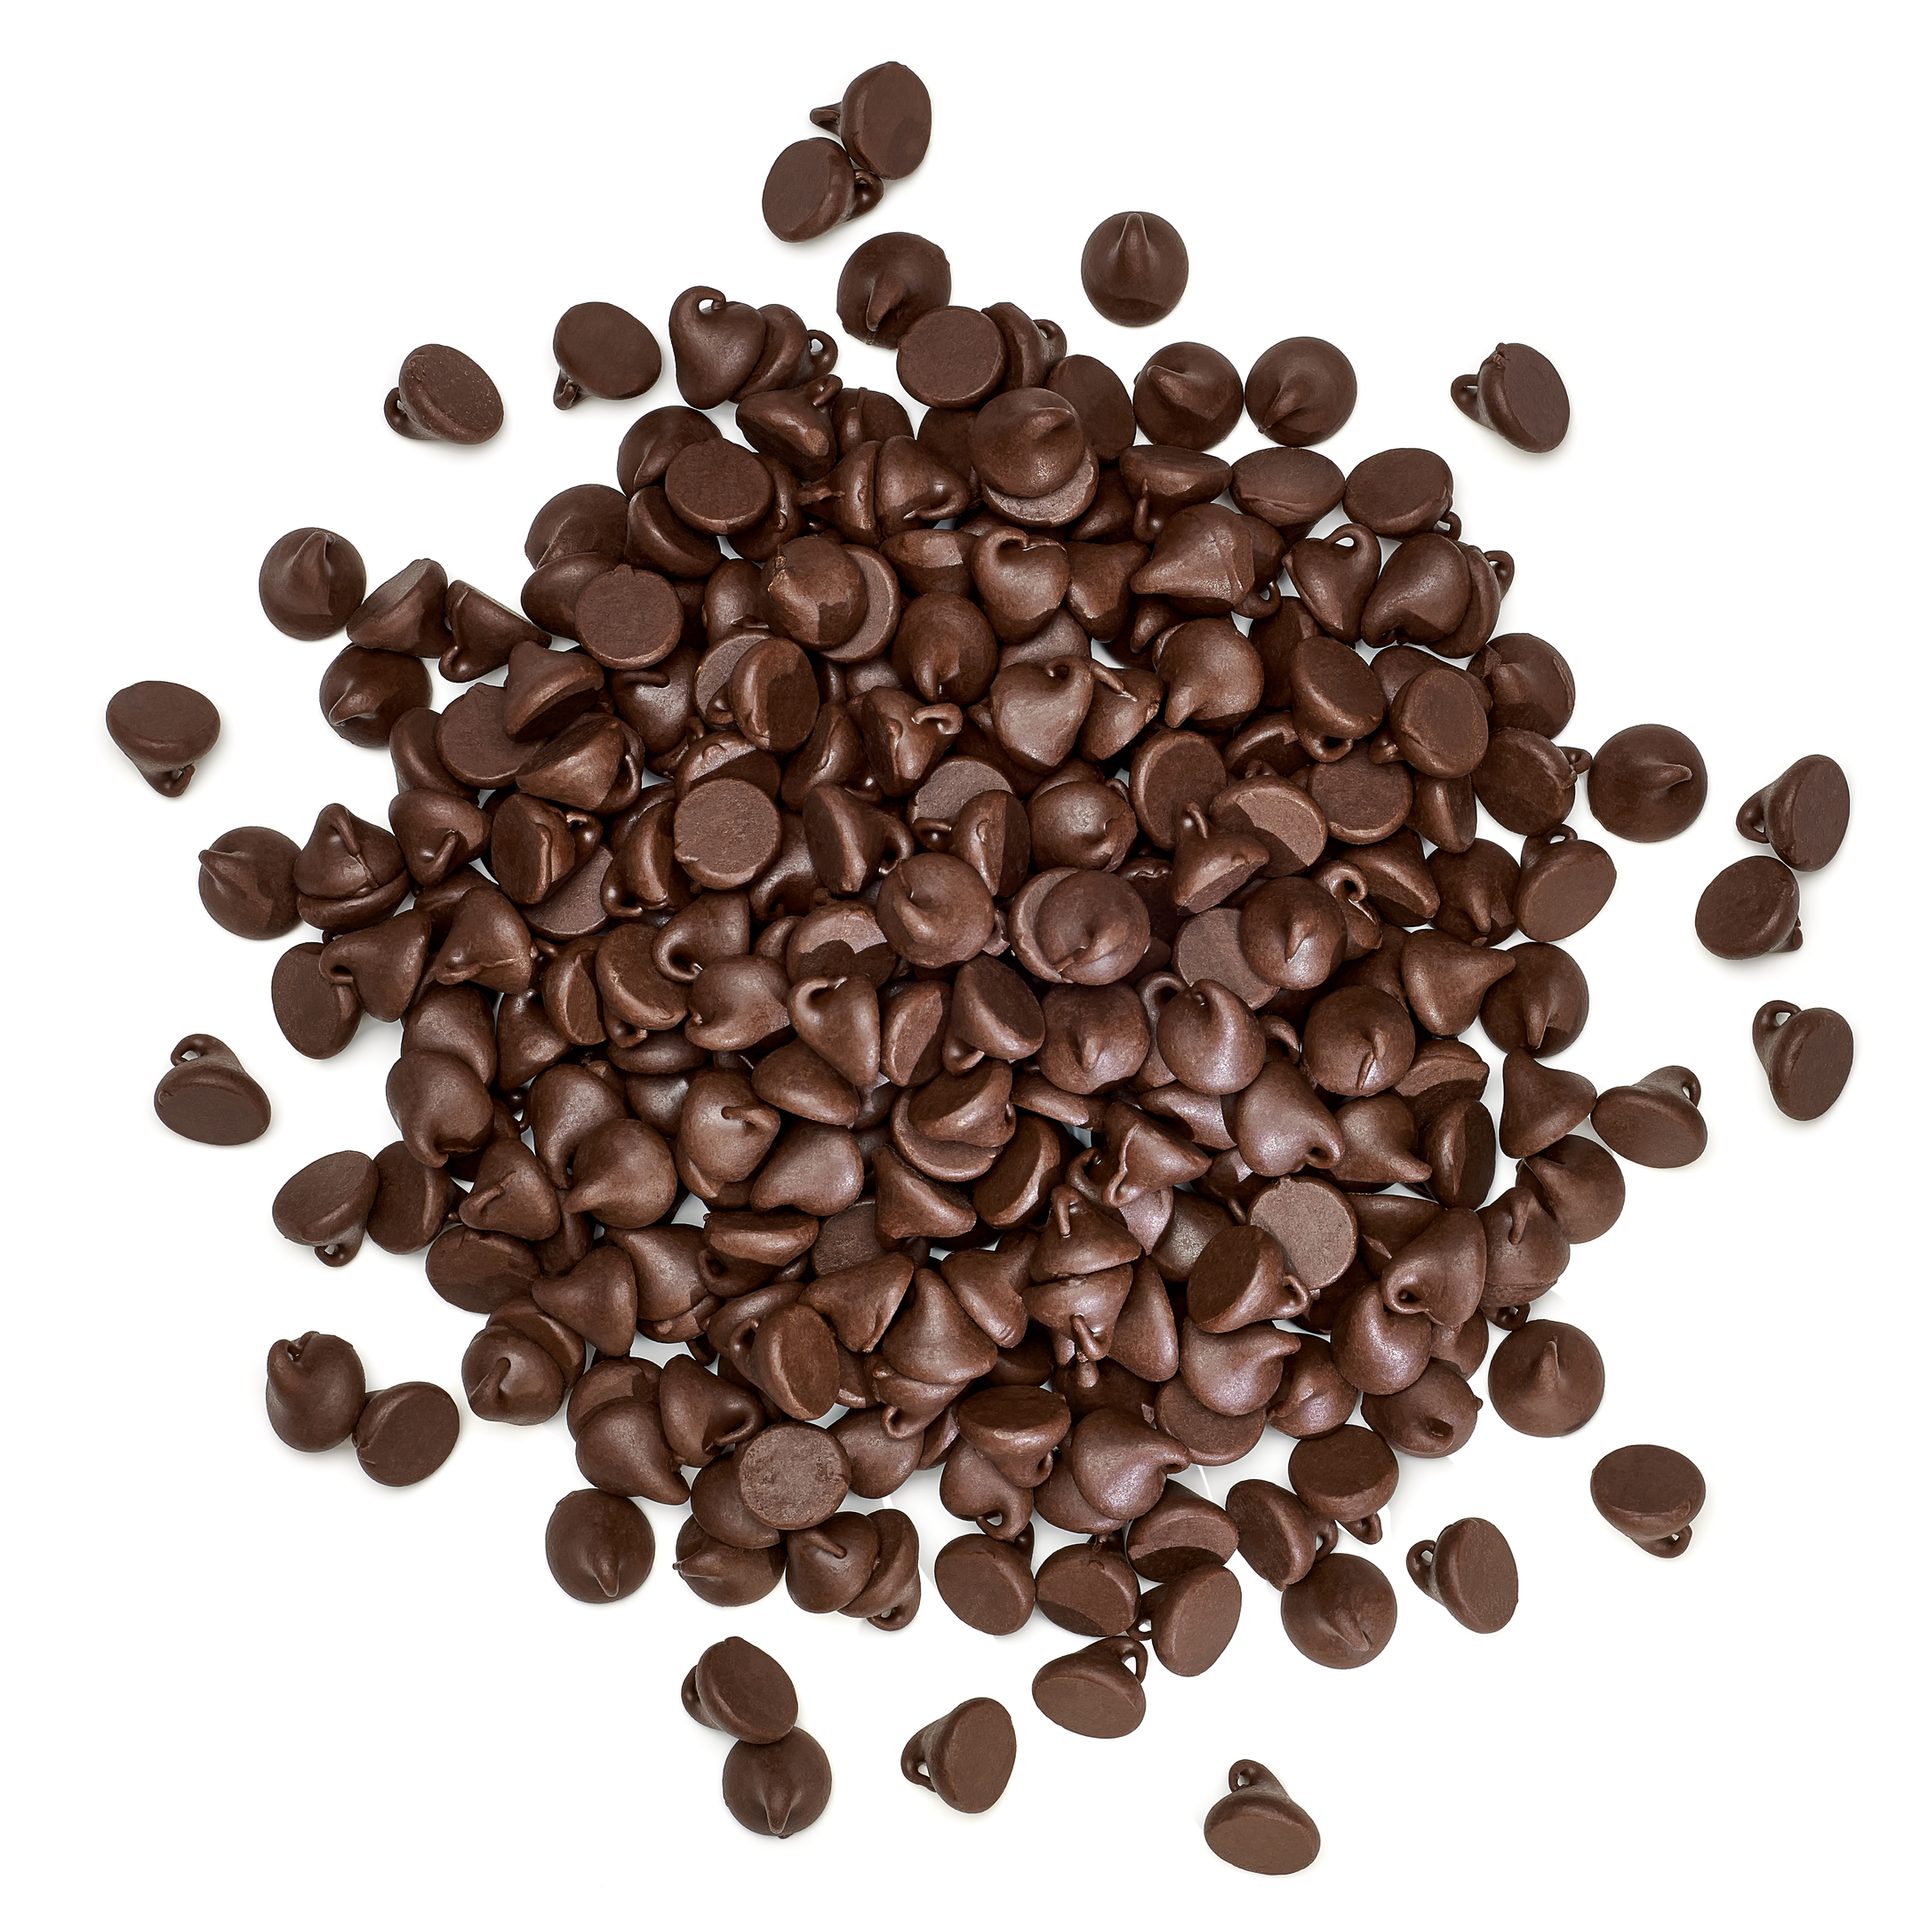 Chocolate chips, Chocolate, White background, View from above